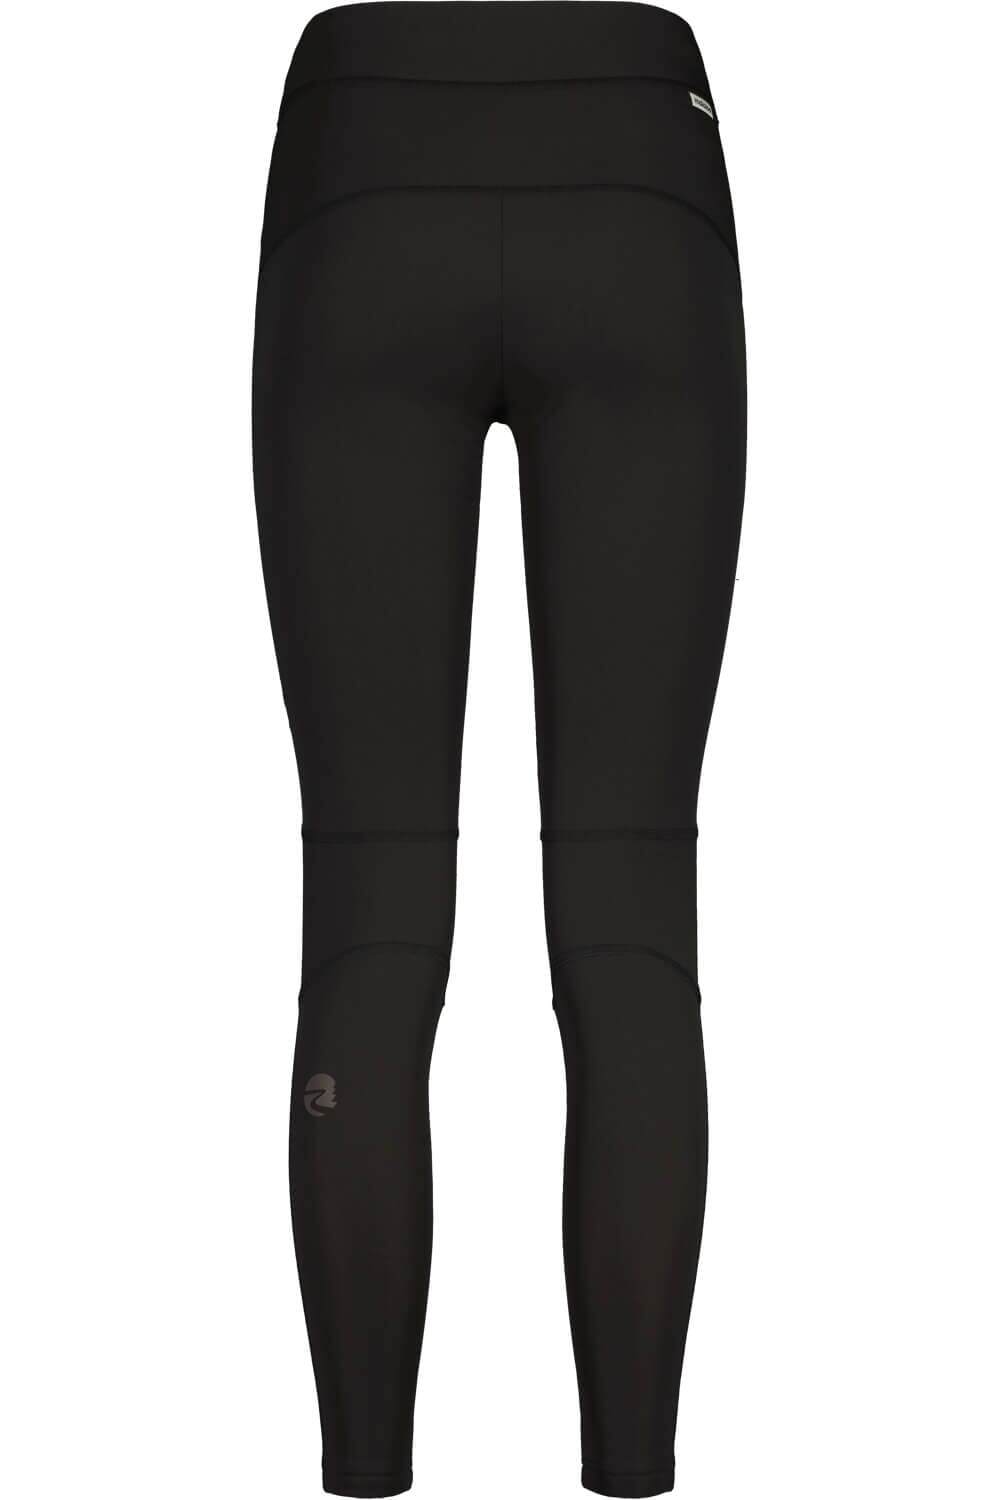 Maloja W's ForcolaM. Adventure Thermal Tights - Recycled Nylon & Recycled  Spandex – Weekendbee - sustainable sportswear